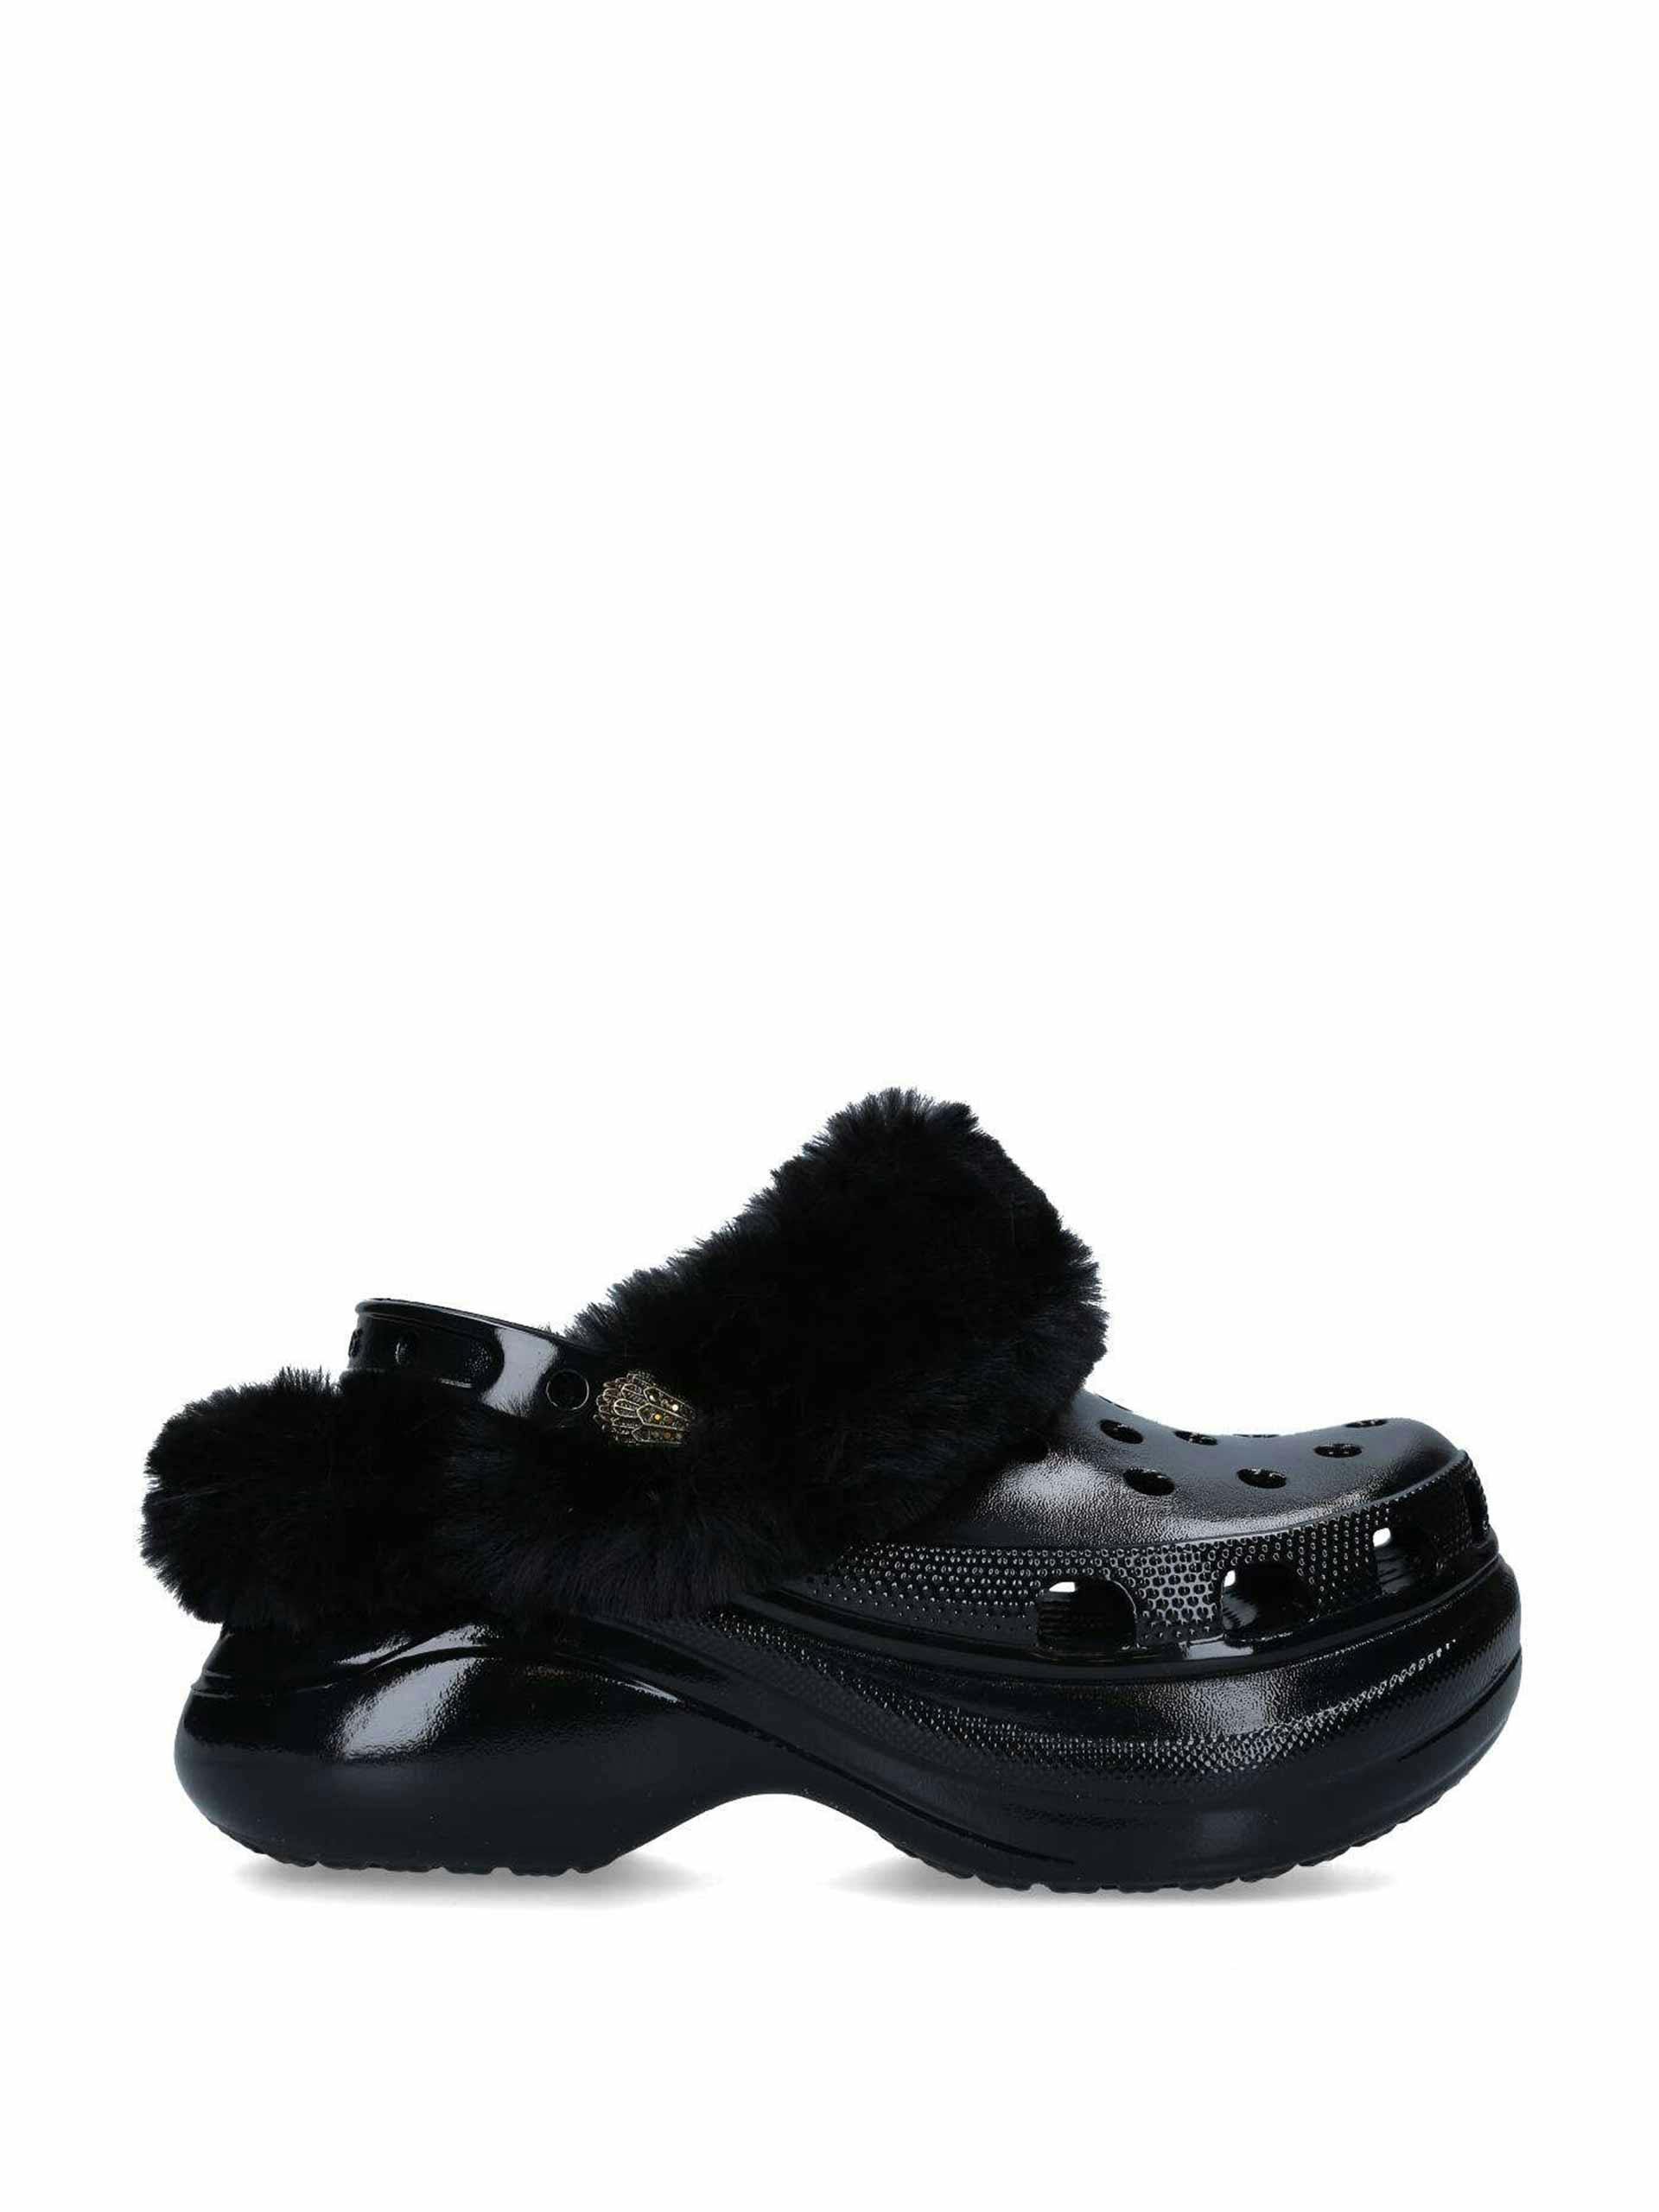 Glossy faux-fur lined slingback clogs